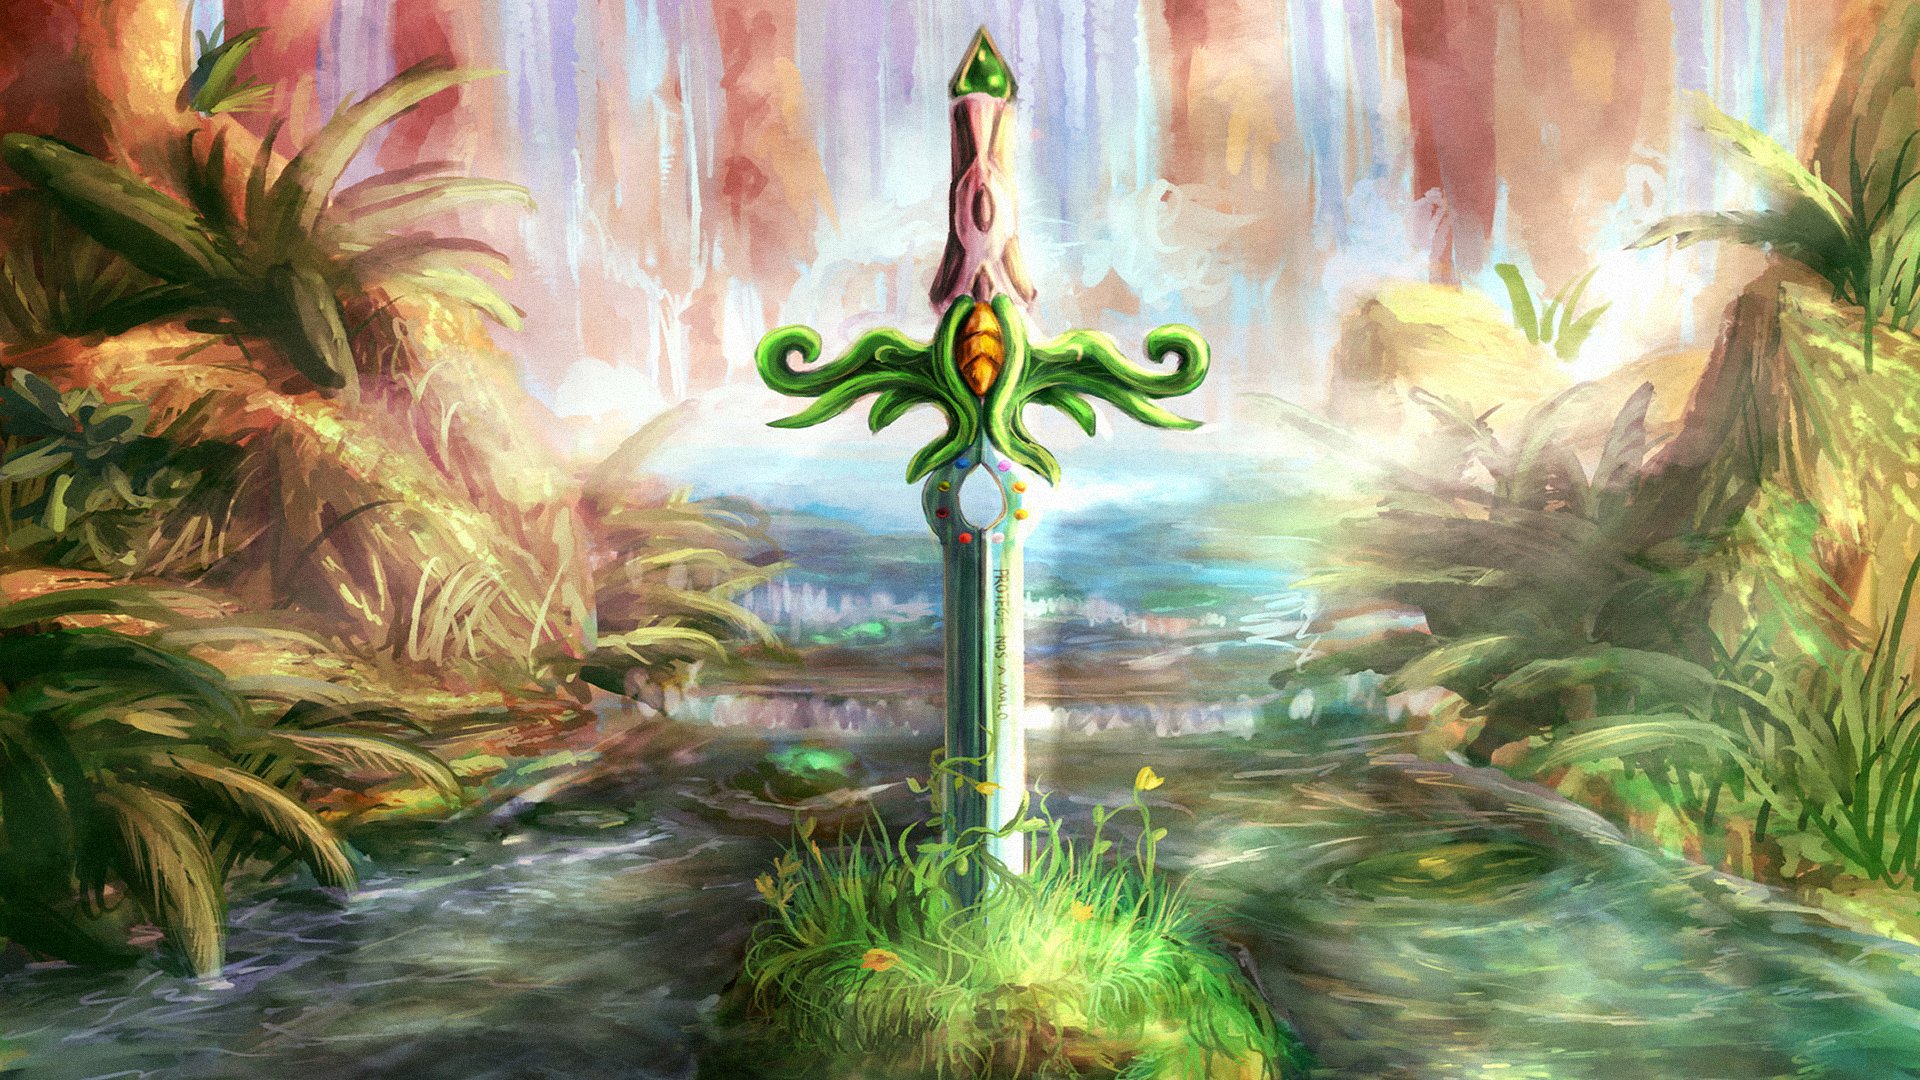 video games, Plants, Sword, Mountains, Water, River, Grass, Painting, Secret of Mana Wallpaper